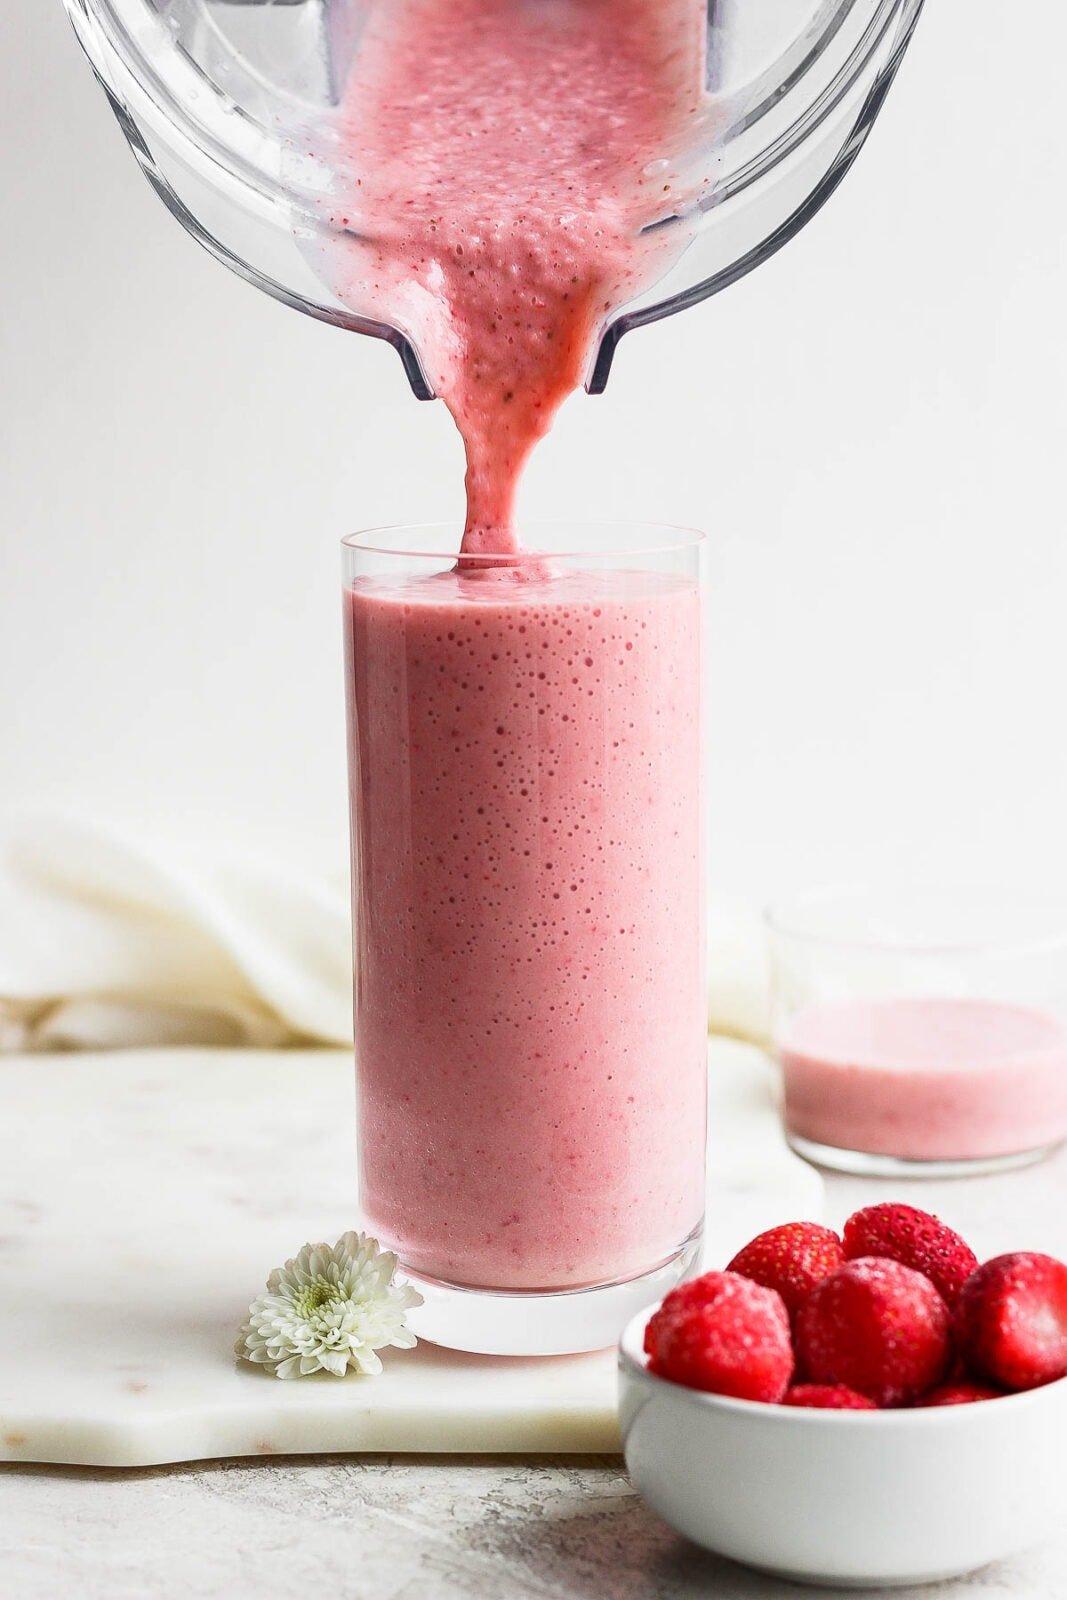 A strawberry banana smoothie being poured from a blender into a glass.